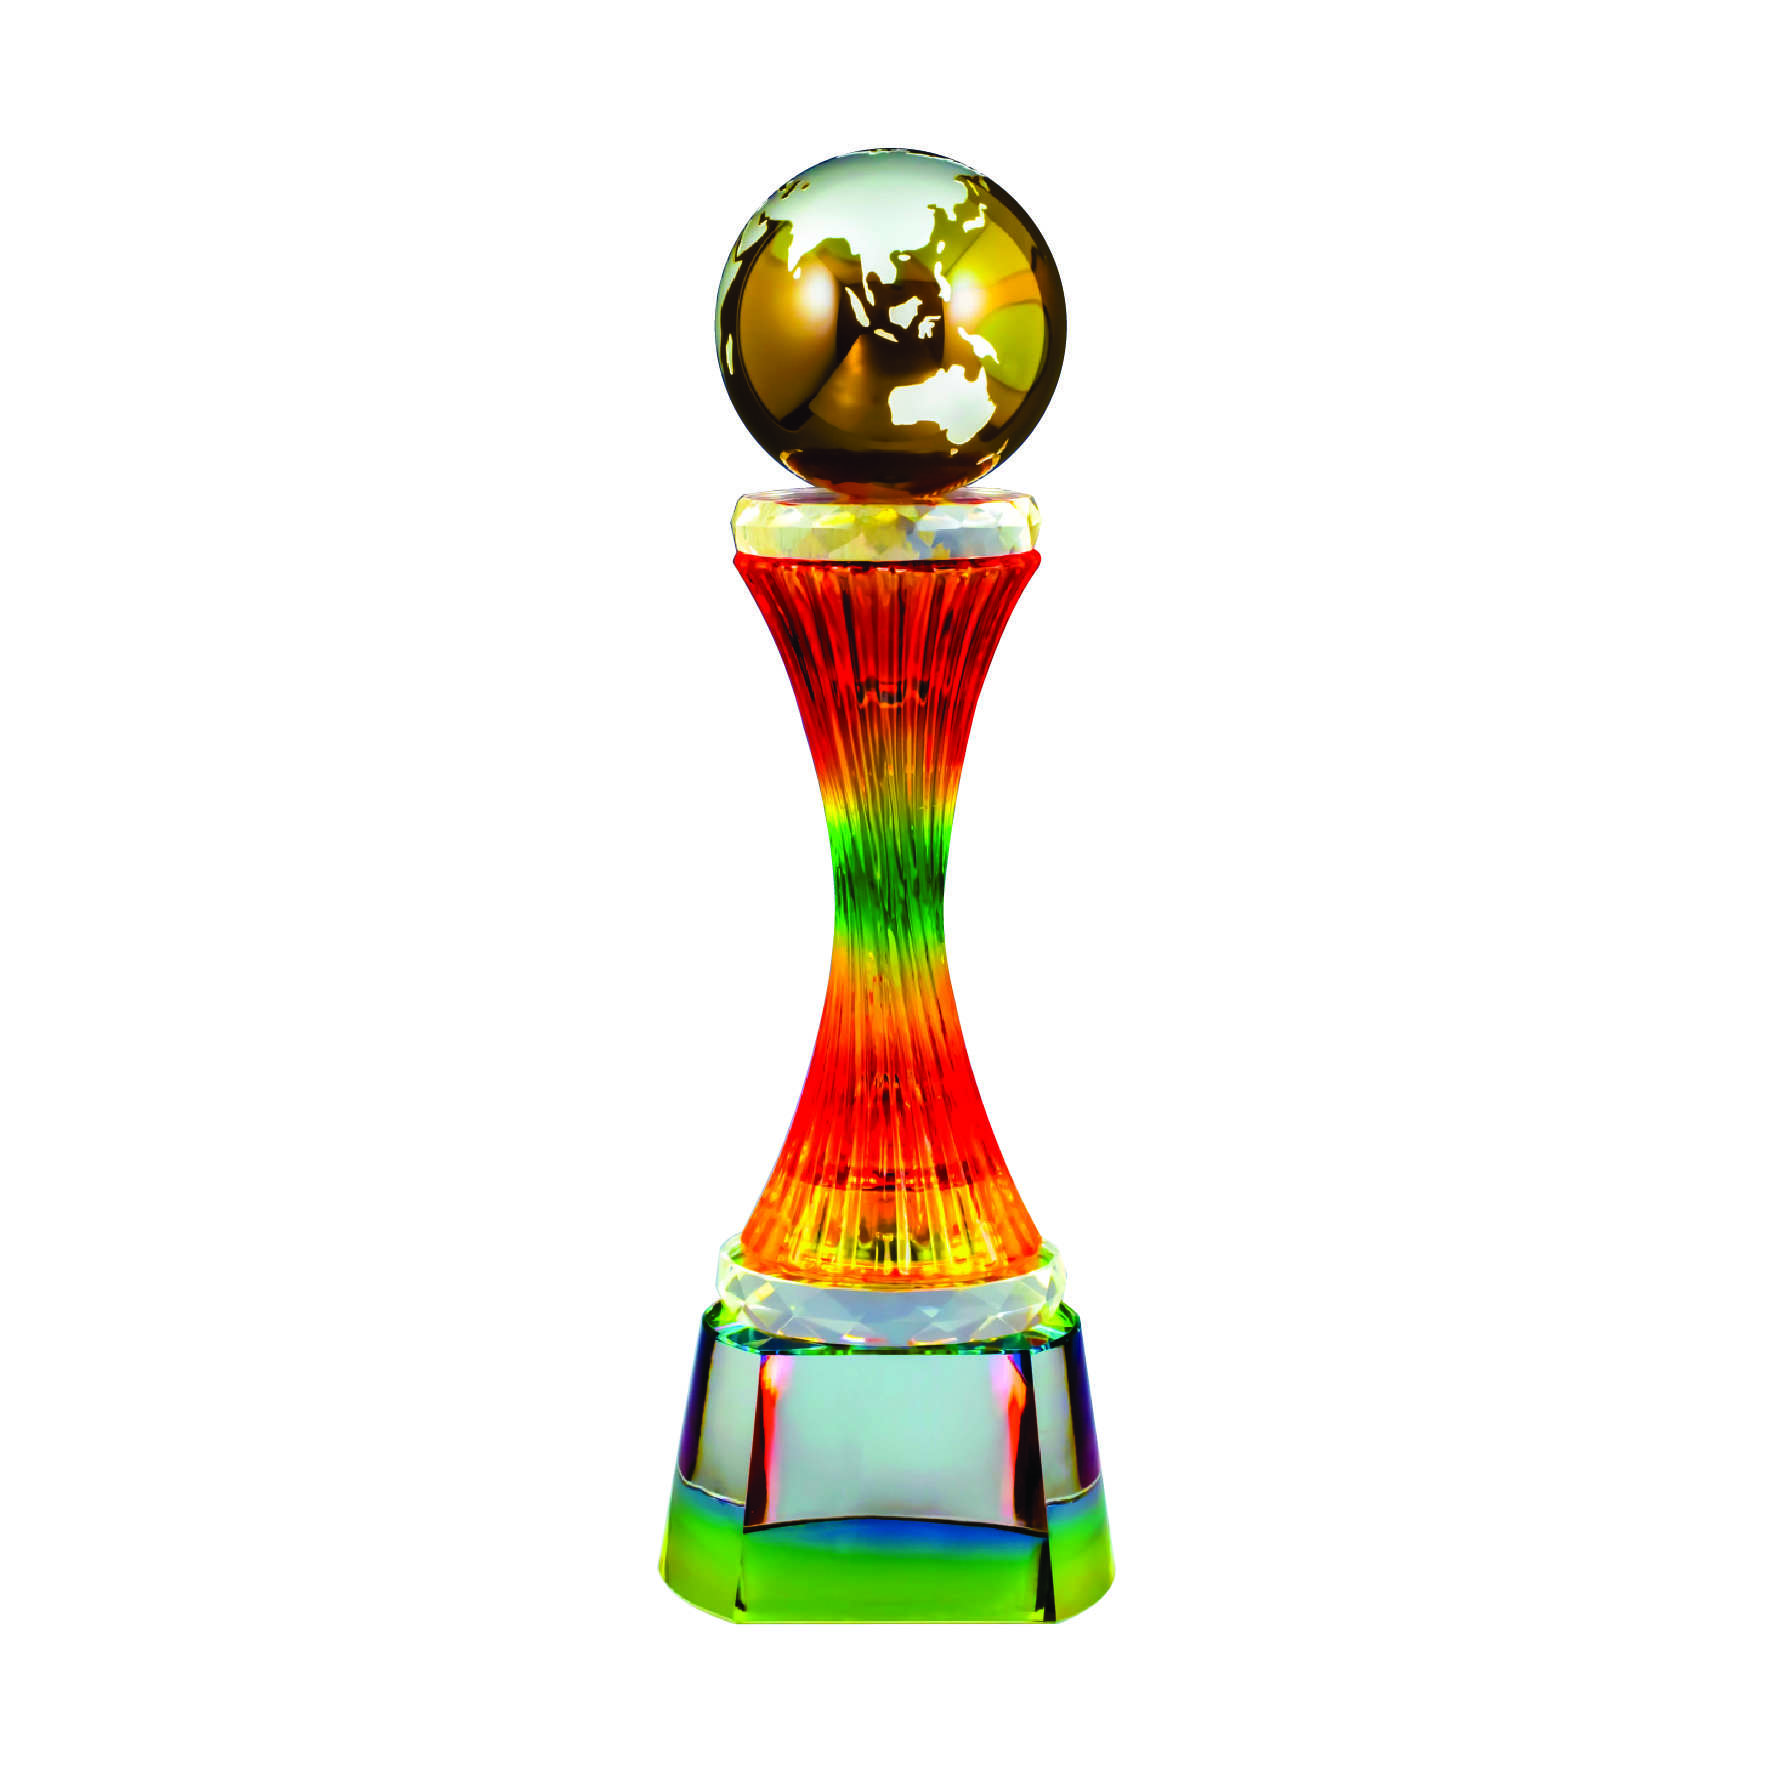 Crystal Globe Trophy at Clazz Trophy Malaysia | Trusted Trophy Supplier Malaysia